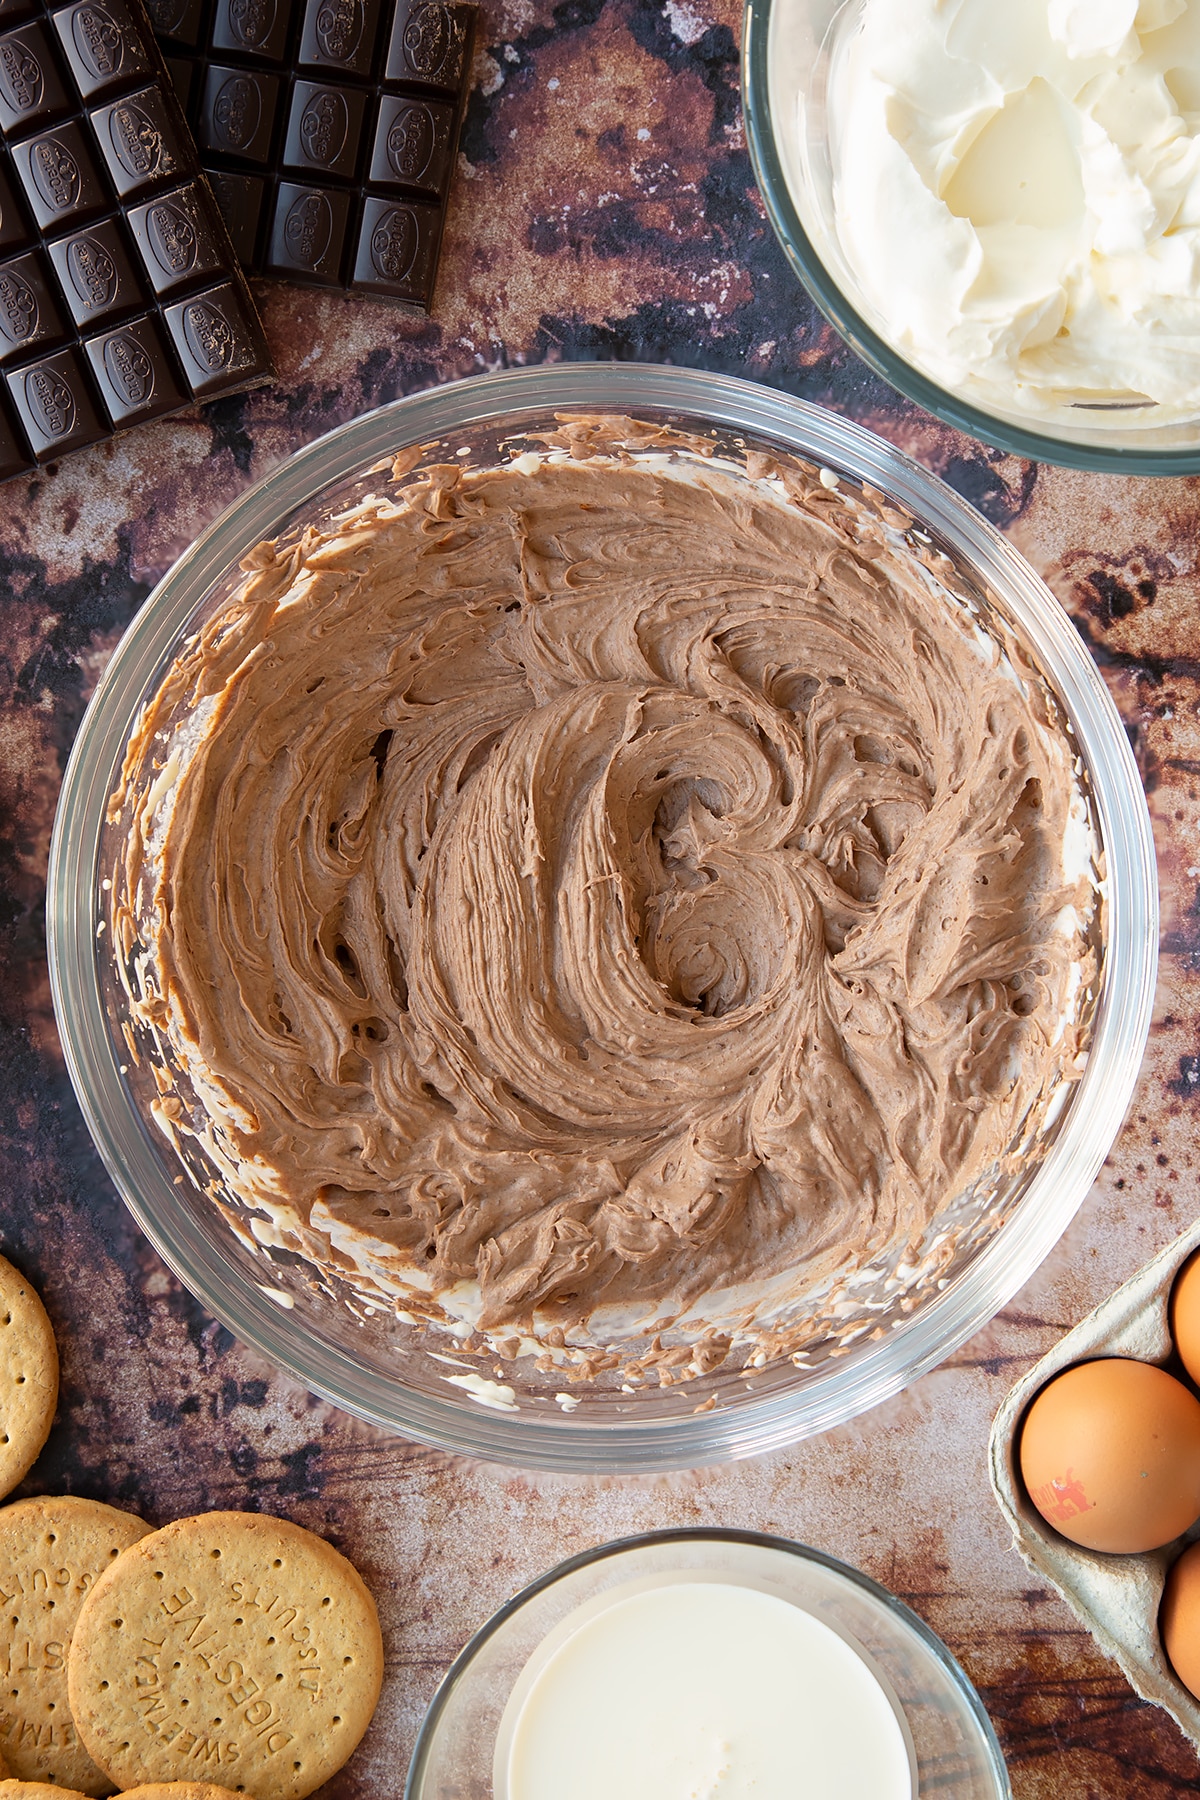 Cream cheese, sugar, cream and melted dark chocolate whisked together in a glass bowl. Ingredients to make chocolate cheesecake cupcakes surround the bowl.